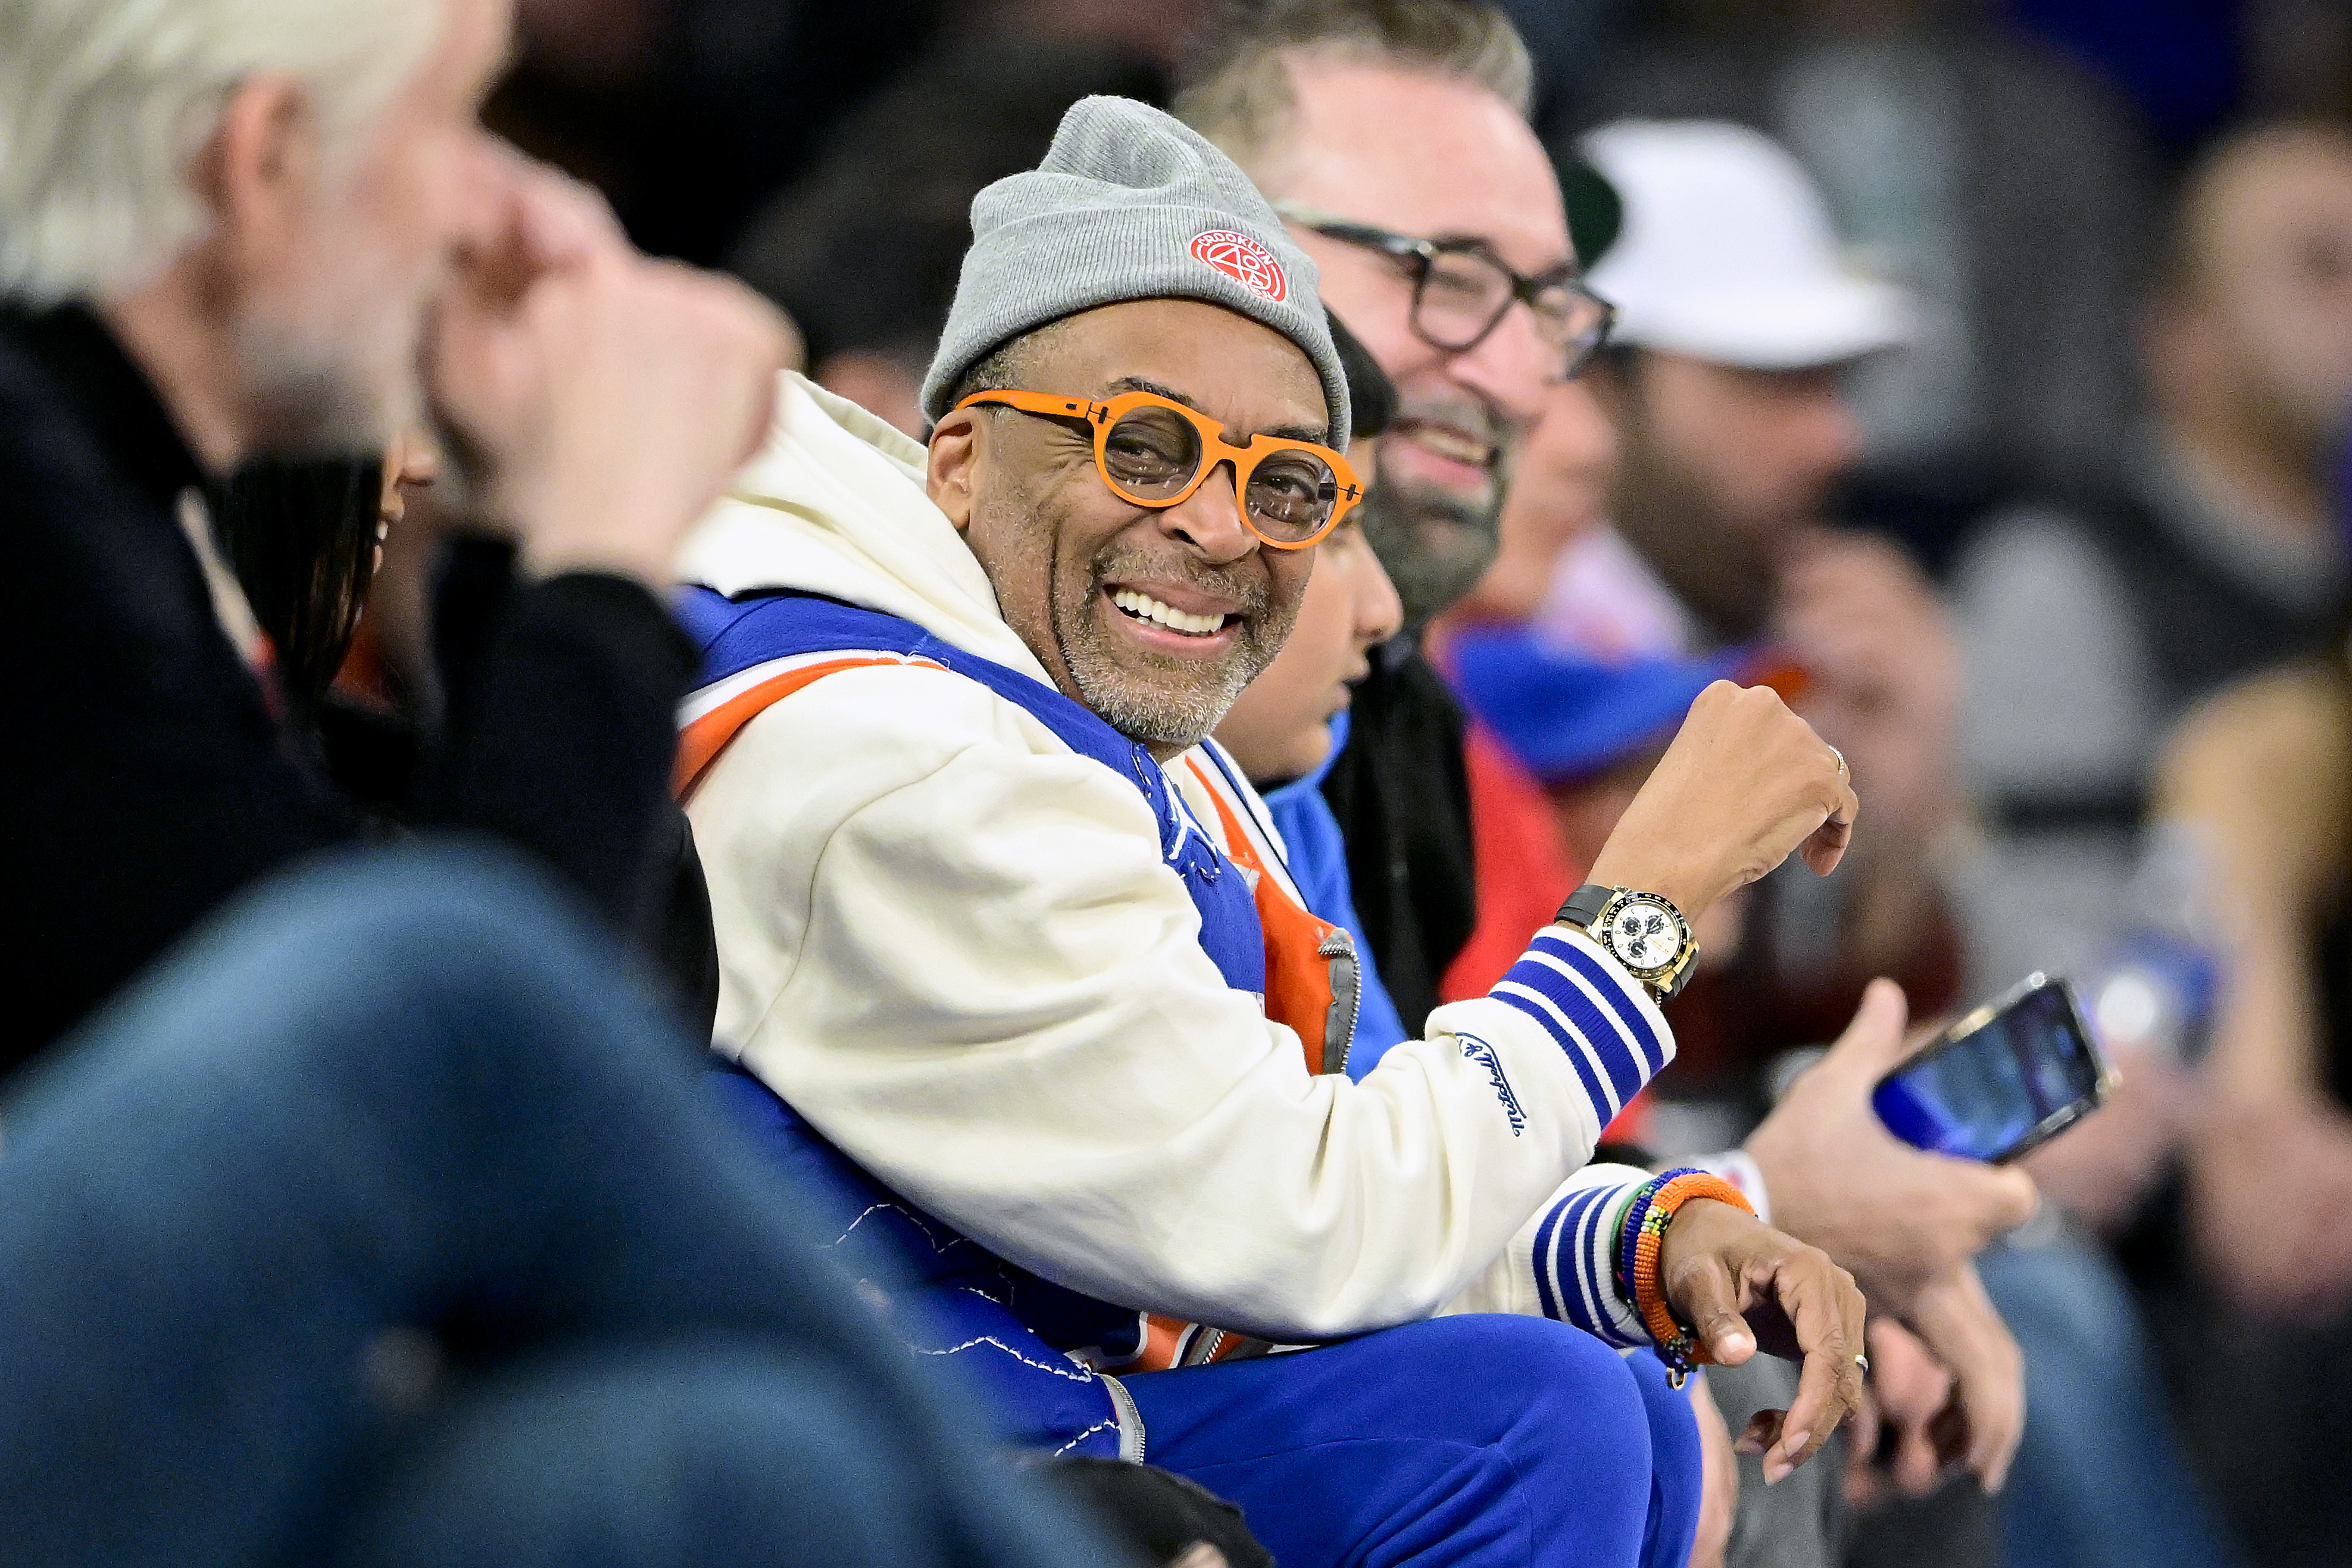 Spike Lee is wearing a white beanie, round glasses, and an orange-and-blue ensemble at a sports event